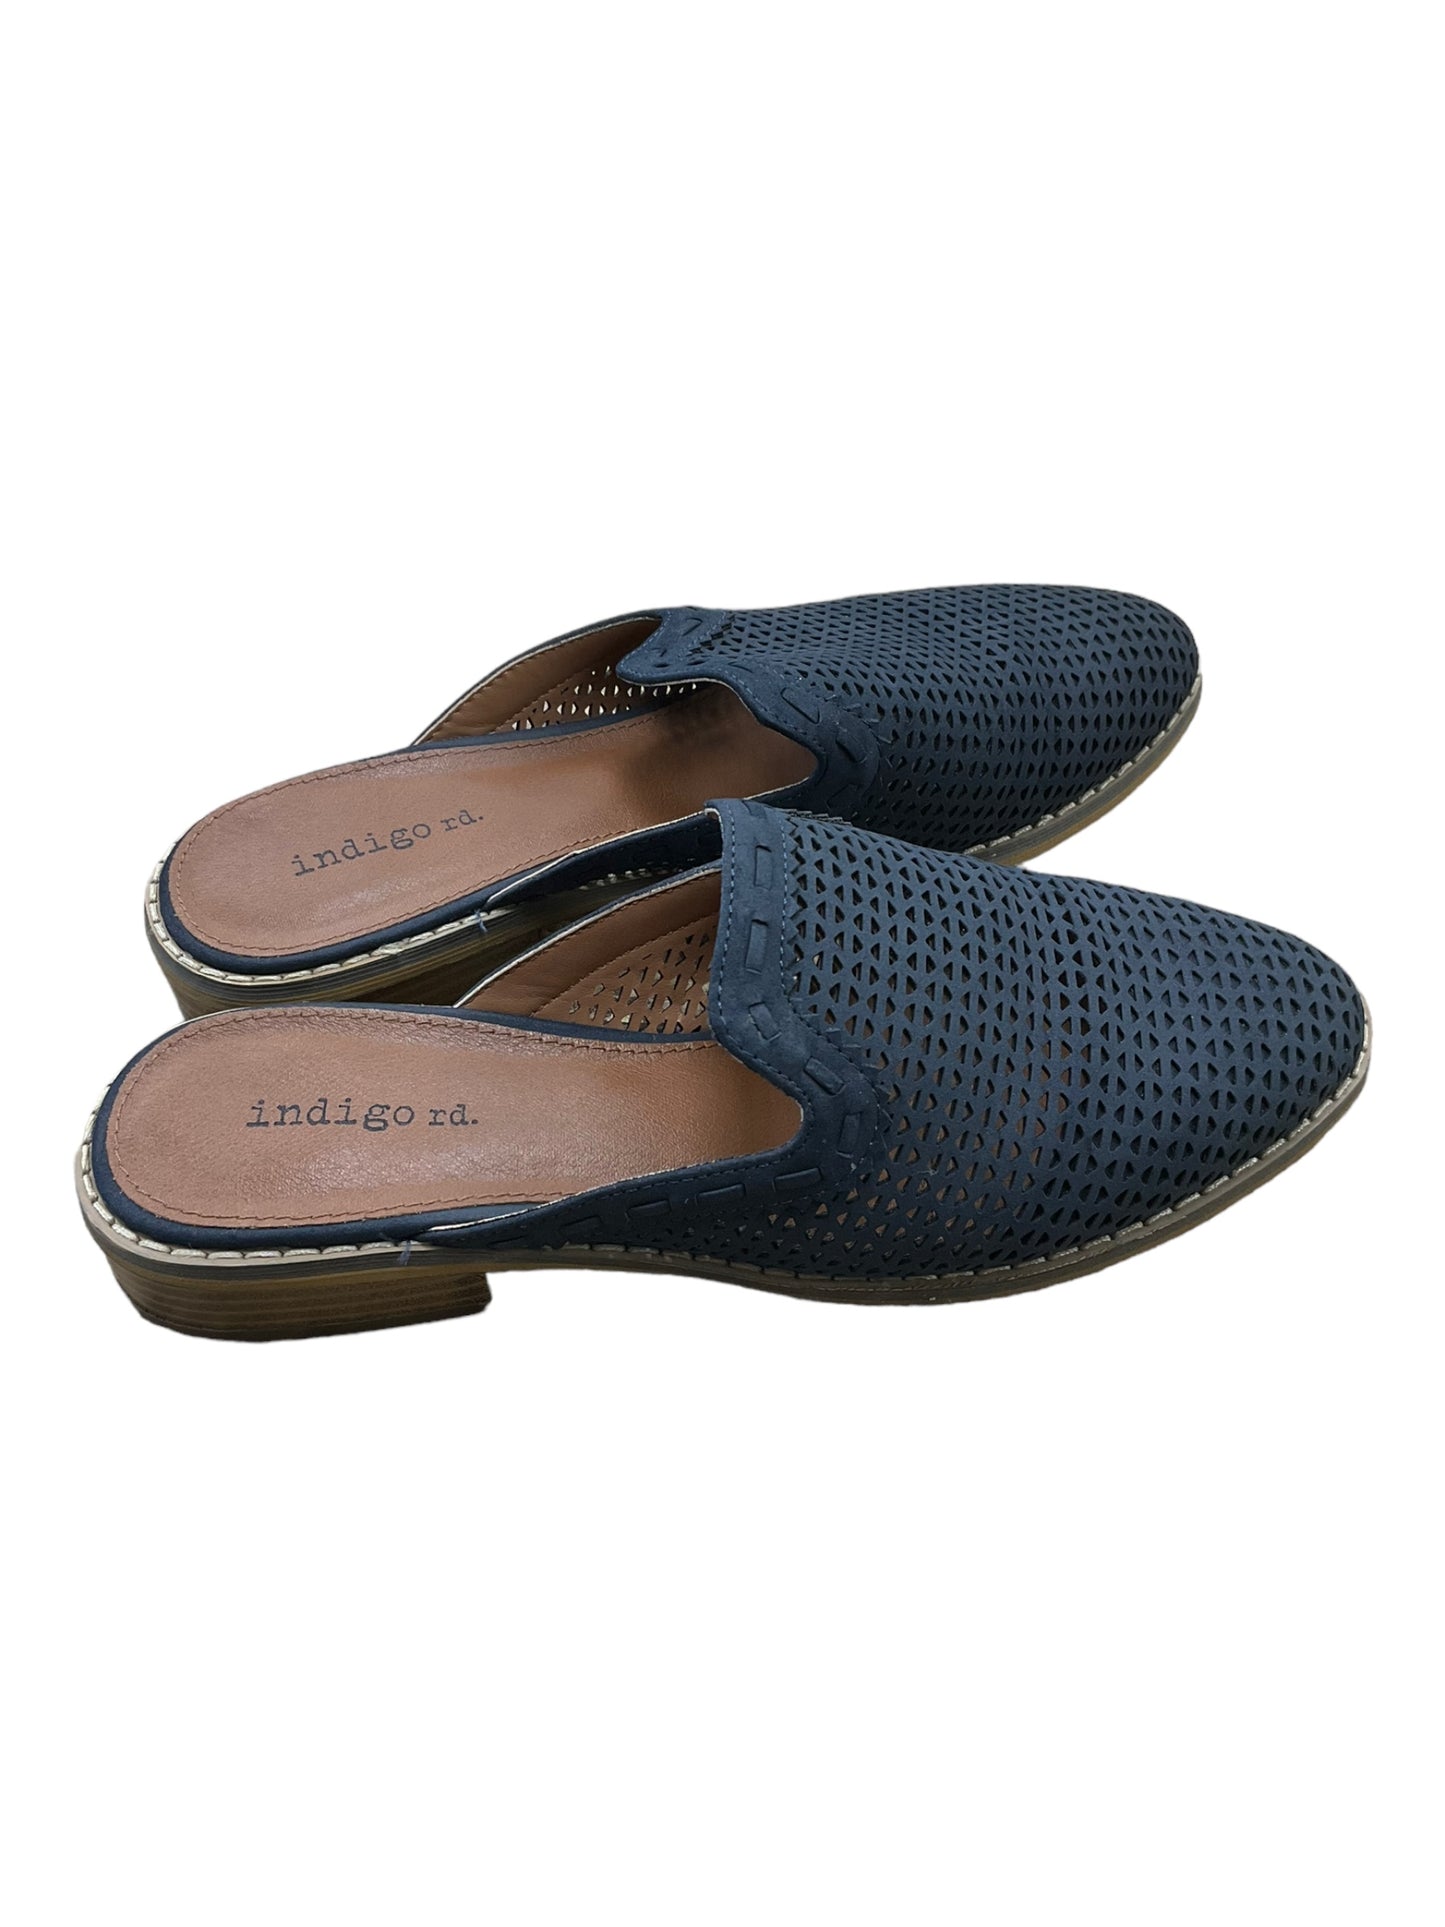 Shoes Flats By Indigo Rd  Size: 7